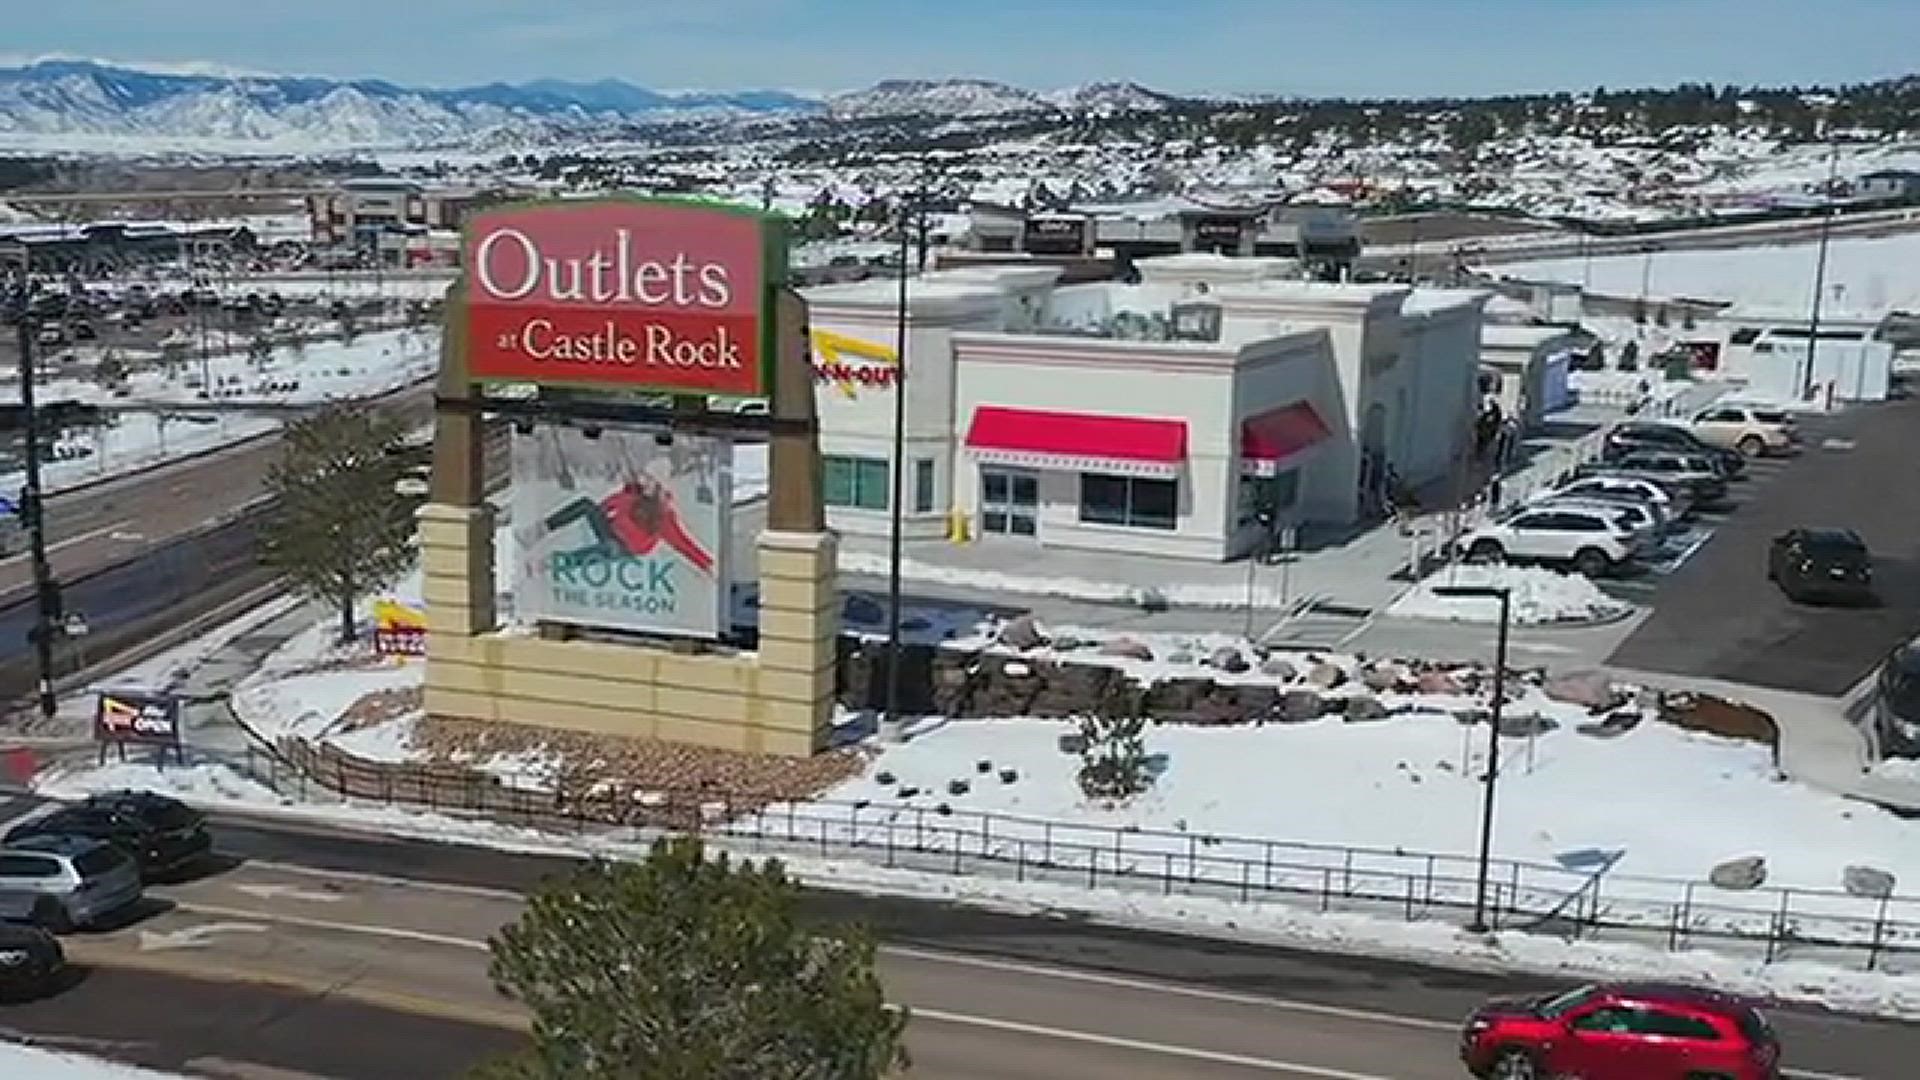 Colorado has a new option for satisfying appetites for a double-double and animal-style fries. In-N-Out Burger opened its new Colorado restaurant on March 18, 2022.